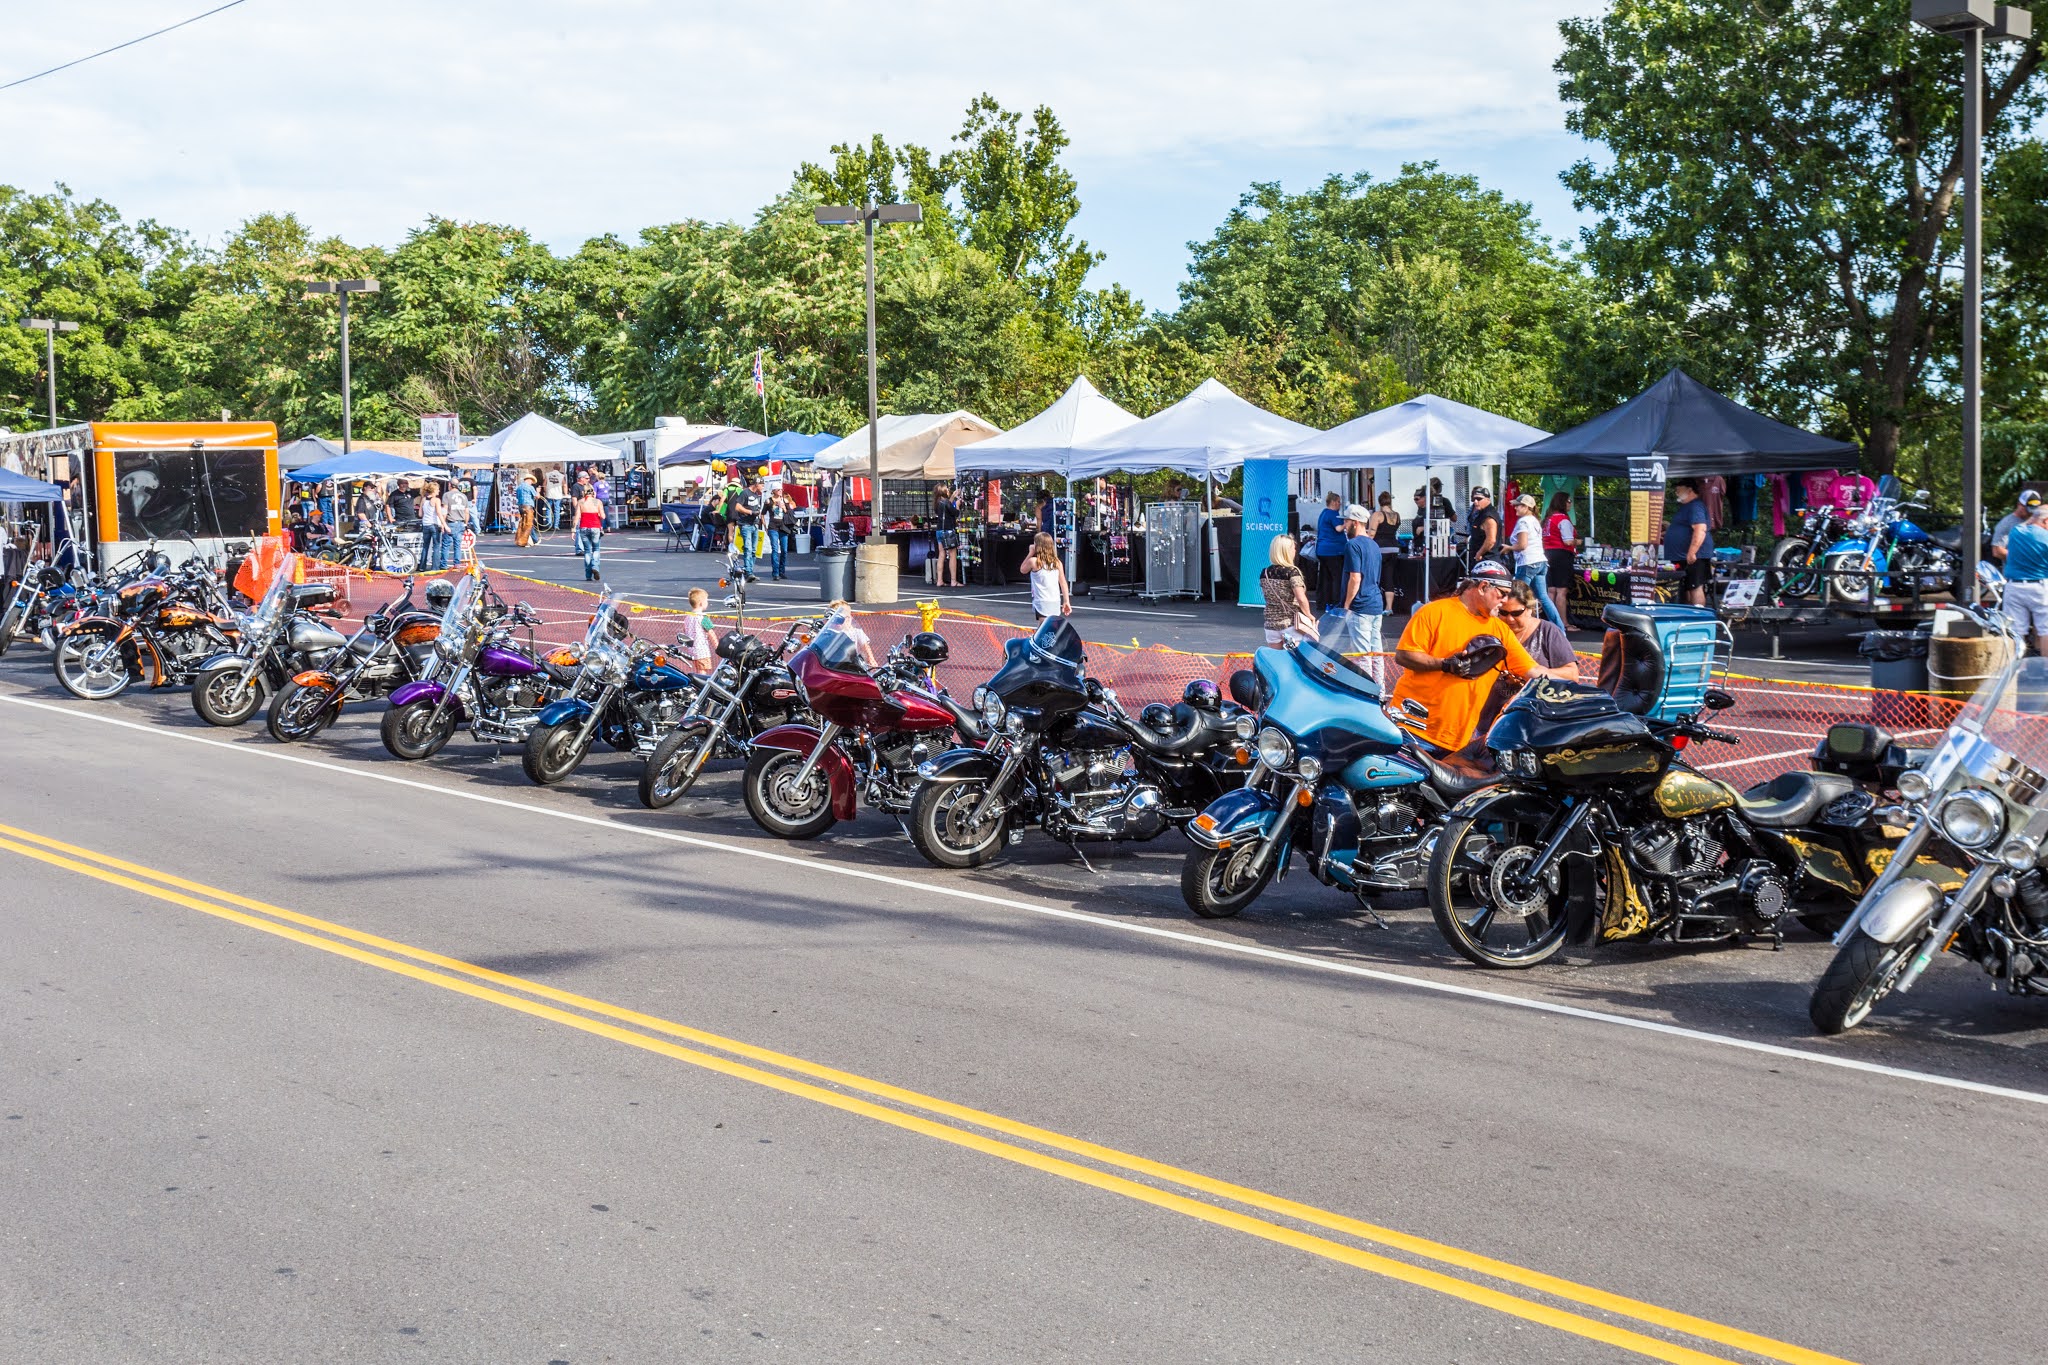 Lake of the Ozarks Bikefest is Here! 🏍️